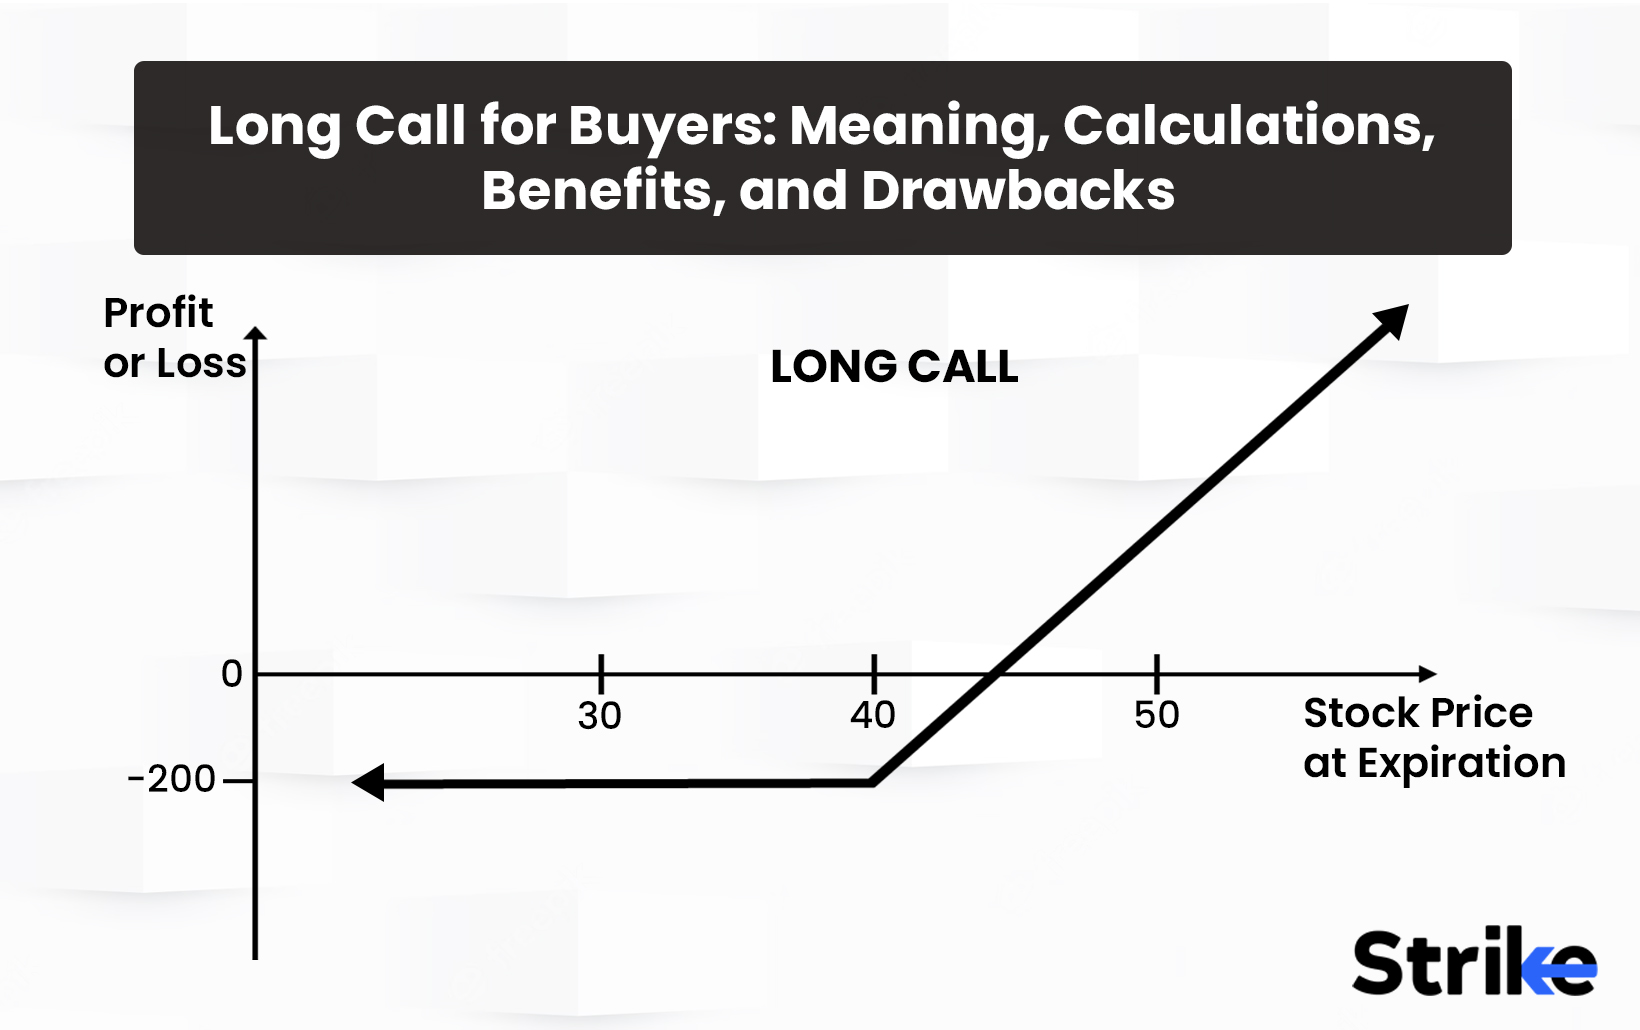 Long Call for Buyers: Meaning, Calculations, Benefits, and Drawbacks